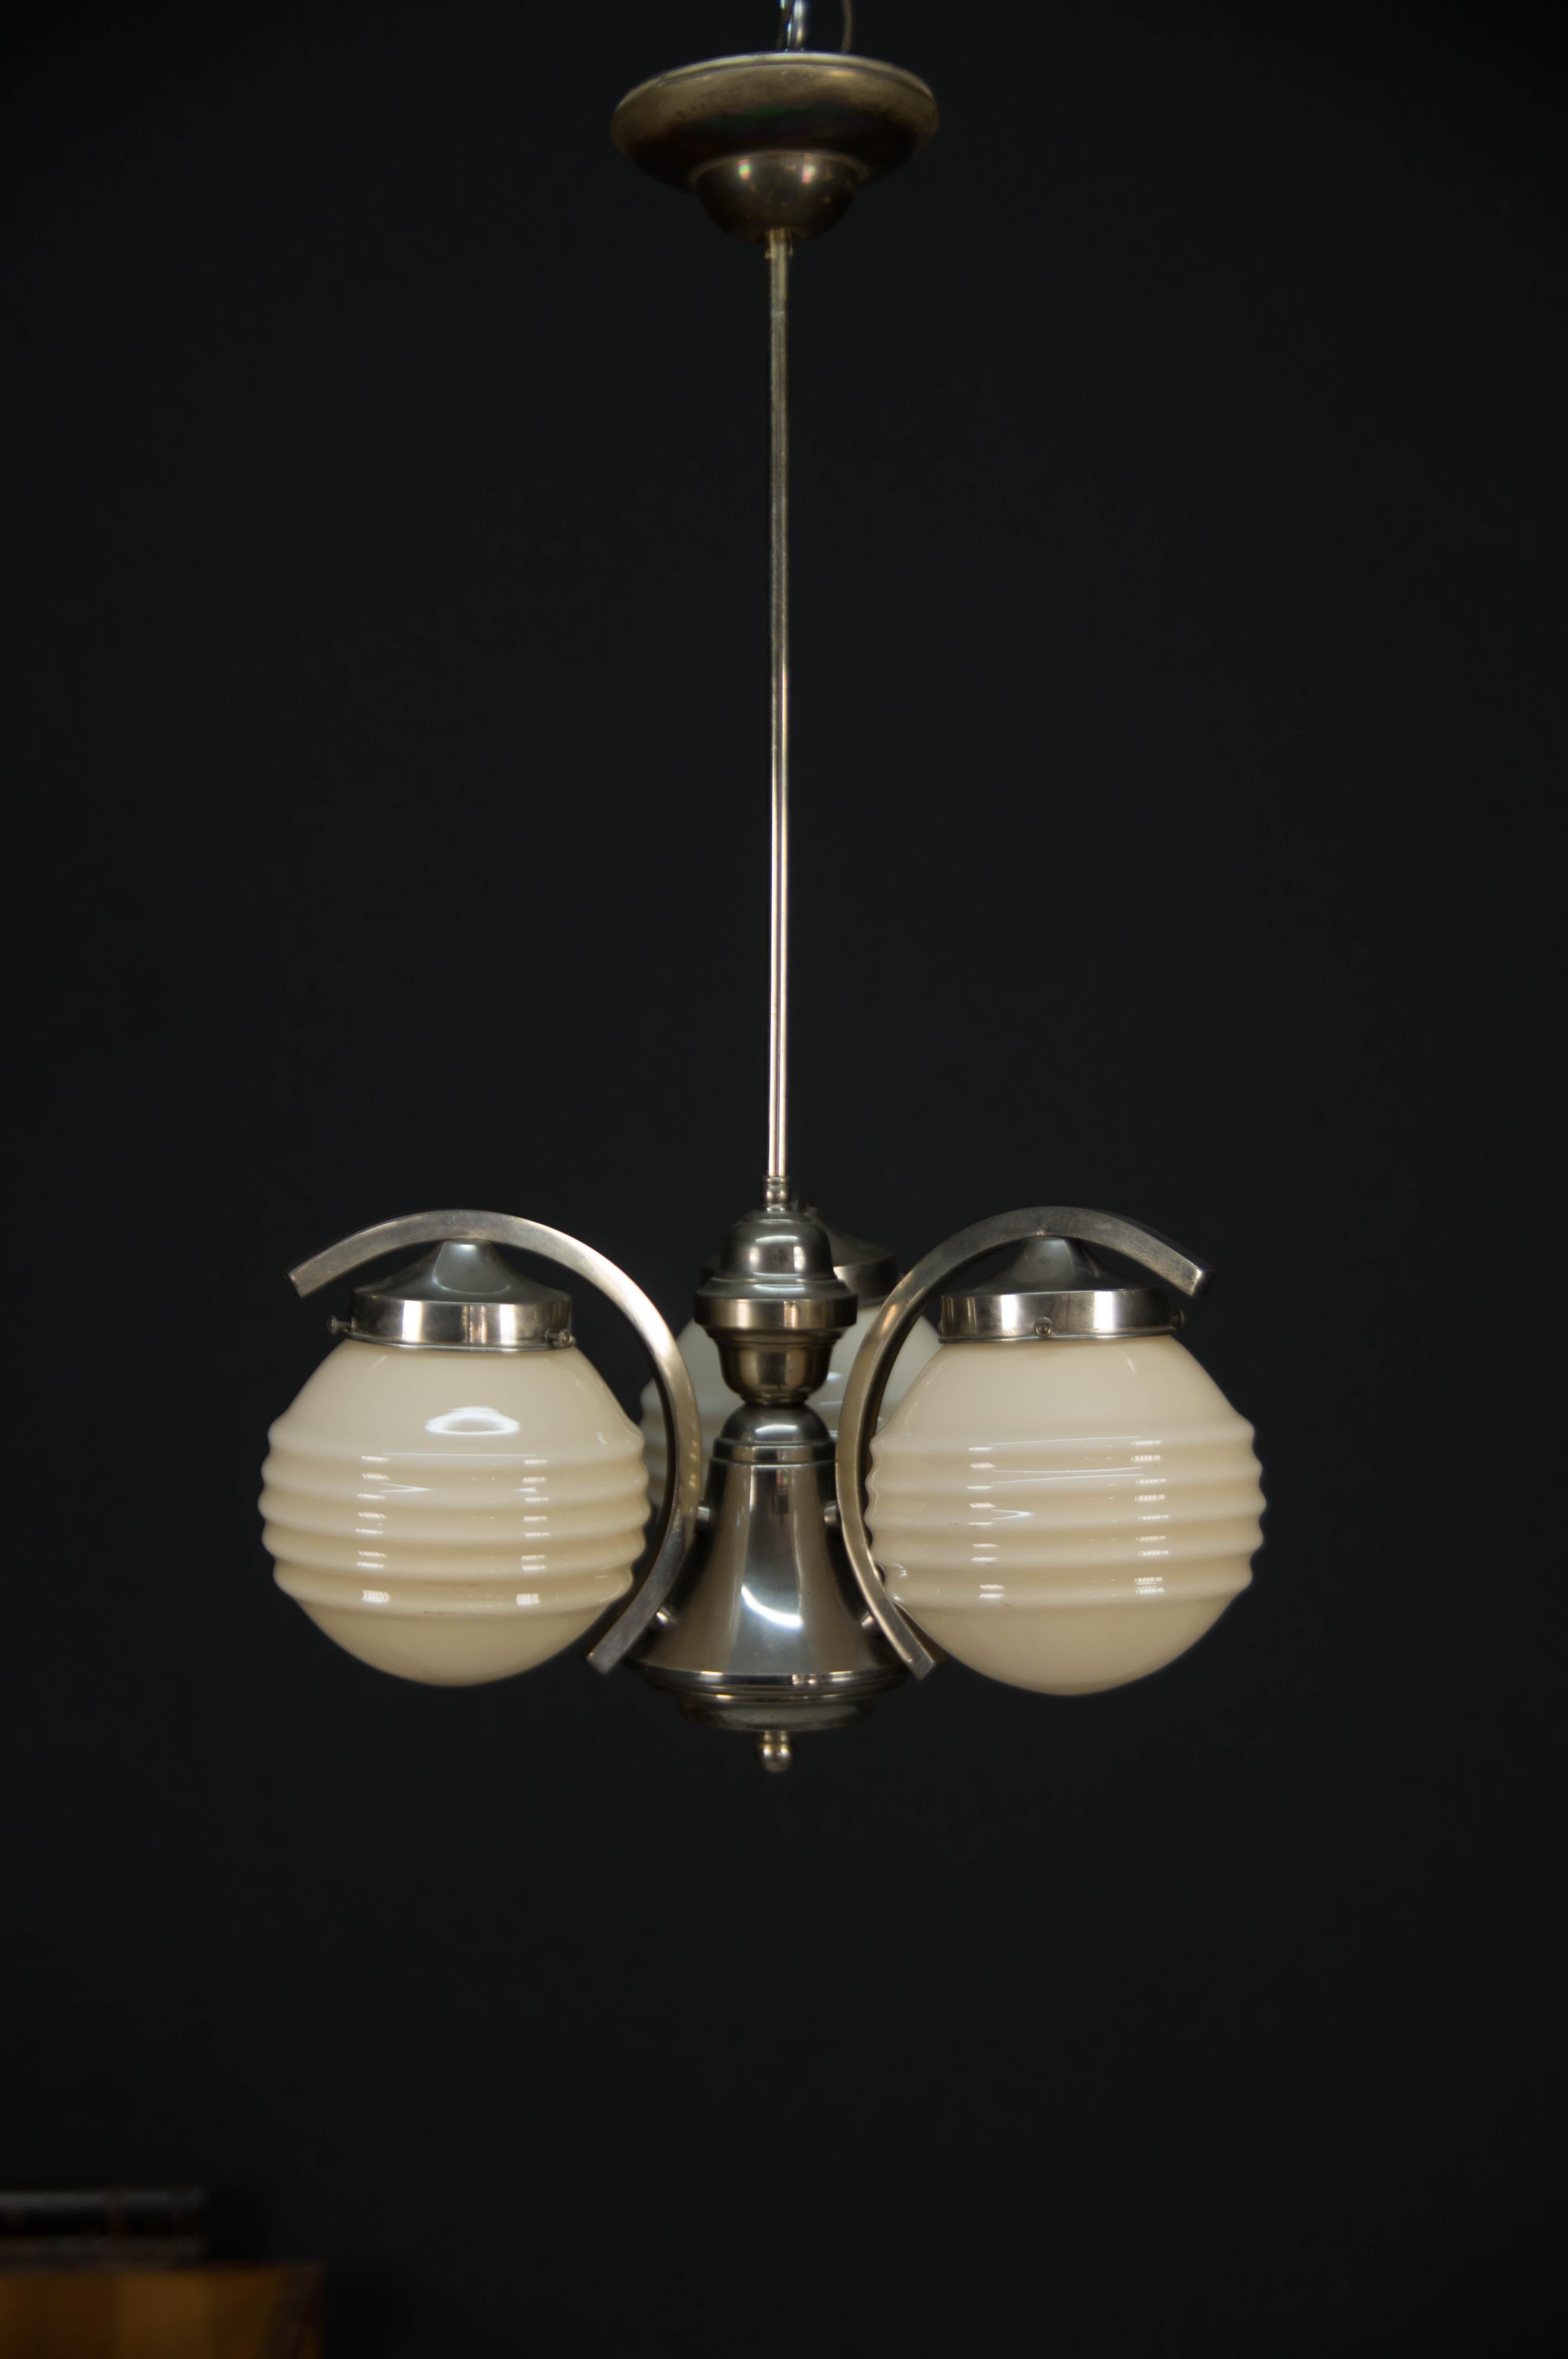 Chrome-plated Art Deco chandelier.
Original chrome with age patina - cleaned and polished
Original glass shades without damage
Rewired: 3x60W, E25-E27 bulb
US wiring compatible.
 